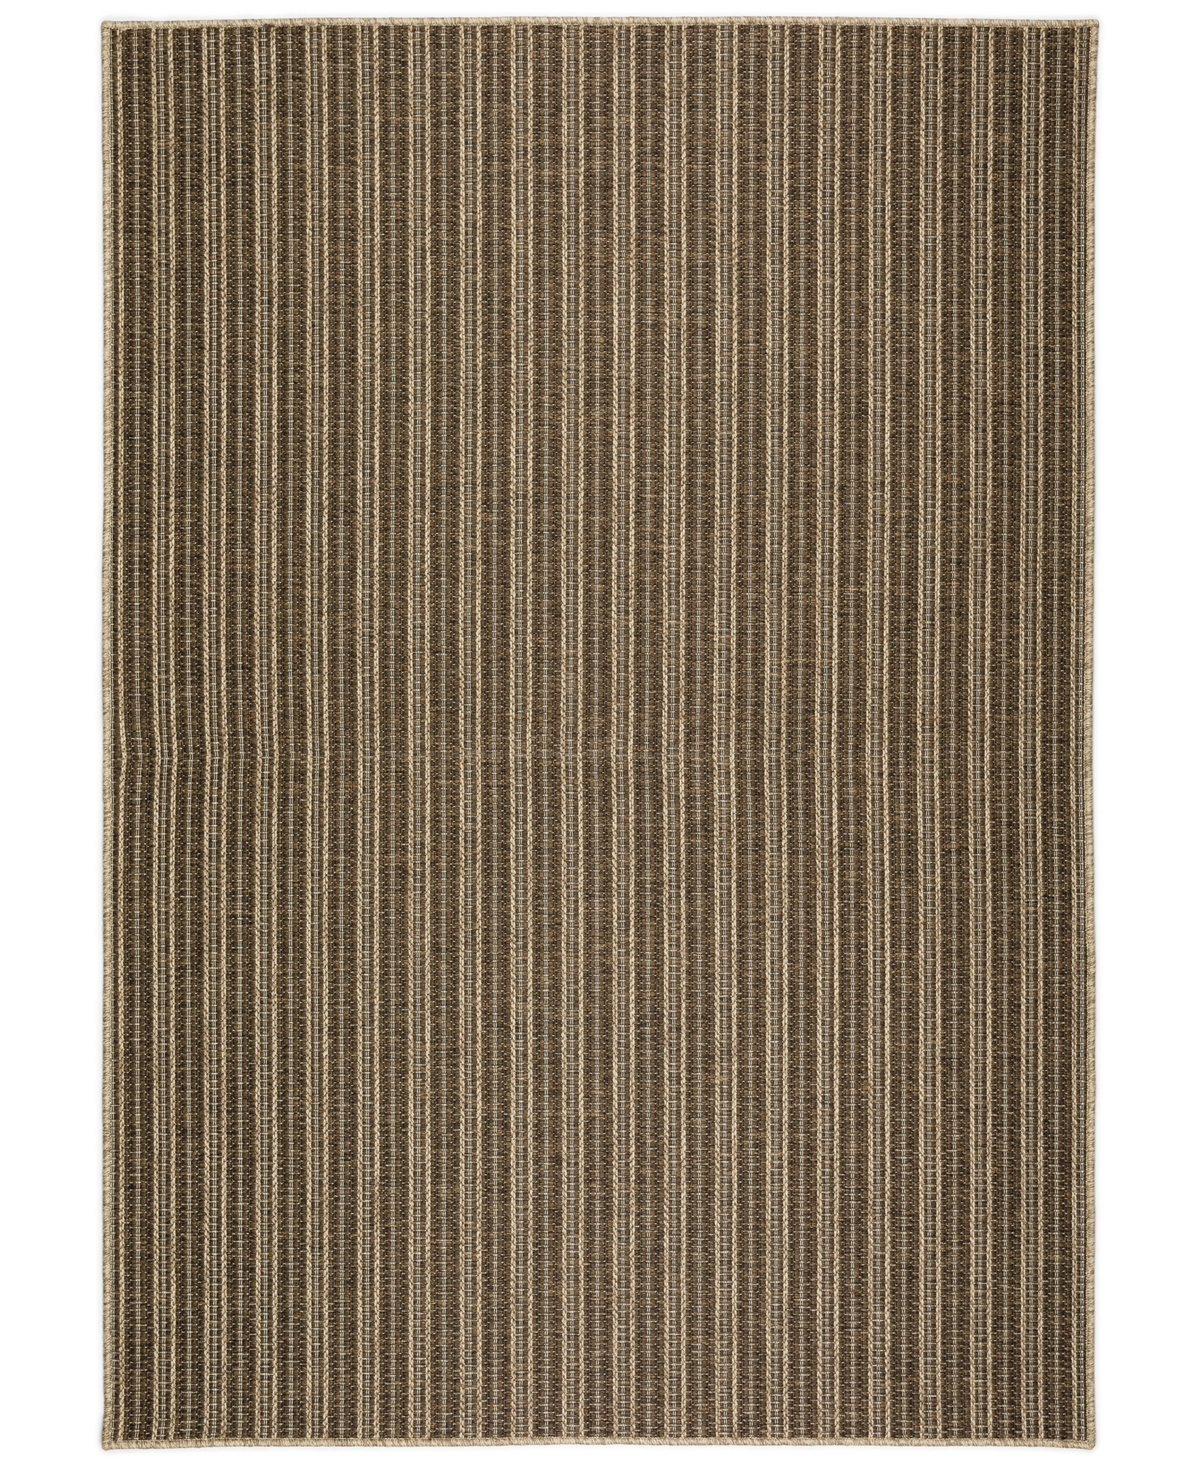 D Style Nusa Outdoor Nsa2 12' X 15' Area Rug In Chocolate